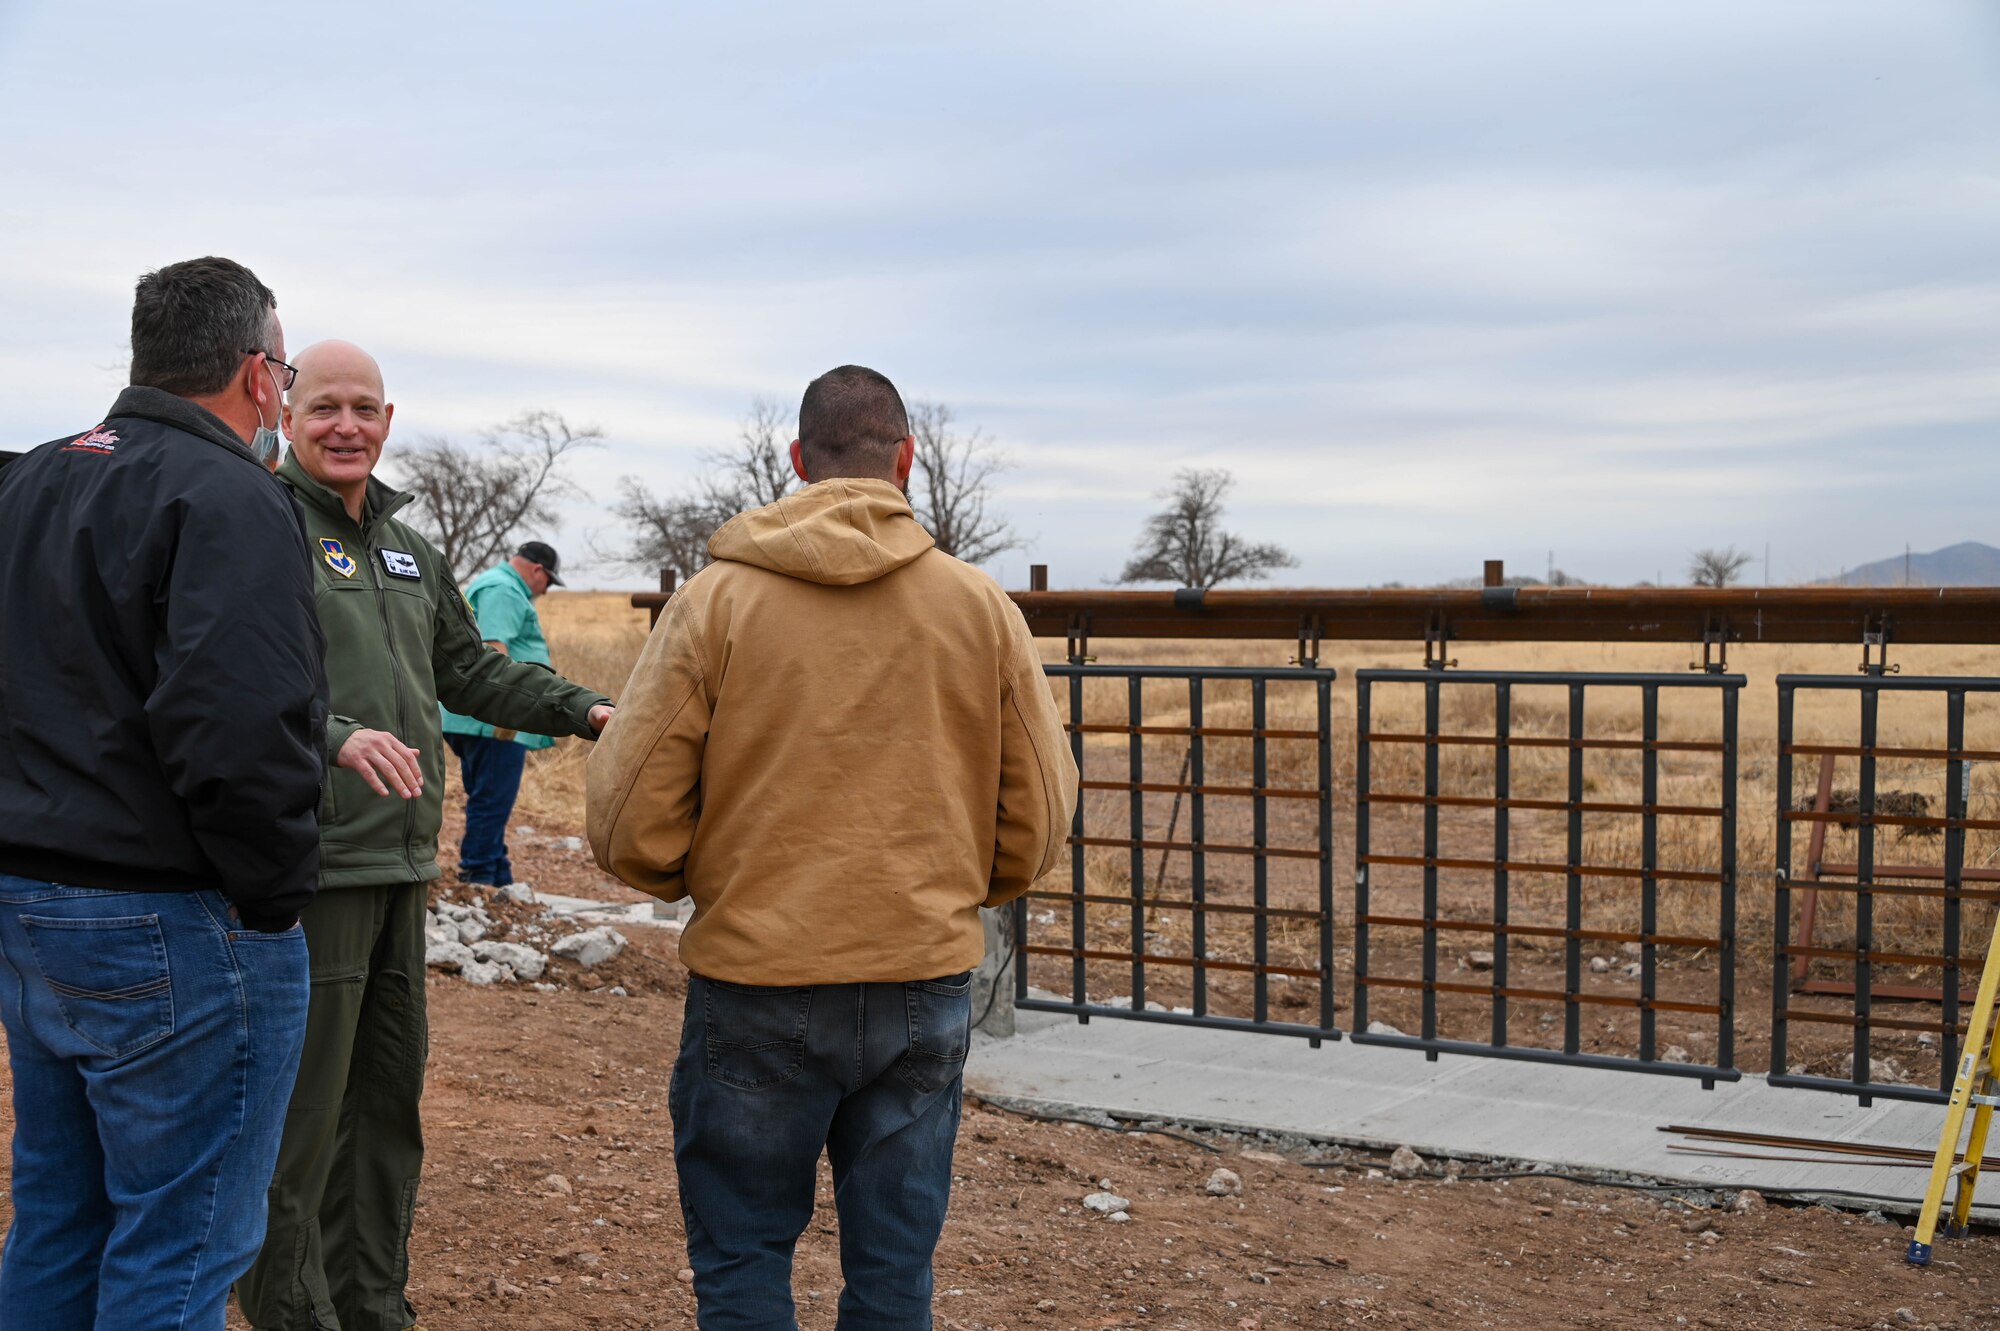 U.S. Air Force Col. Blaine Baker, 97th Air Mobility Wing commander, talks with 97th Civil Engineering Squadron members about the new portion of the fence at Altus Air Force Base, Oklahoma, Dec. 17, 2021. A total of eight gates have been constructed, with one on the south side of the base built by contractors. (U.S. Air Force photo by Airman 1st Class Kayla Christenson)